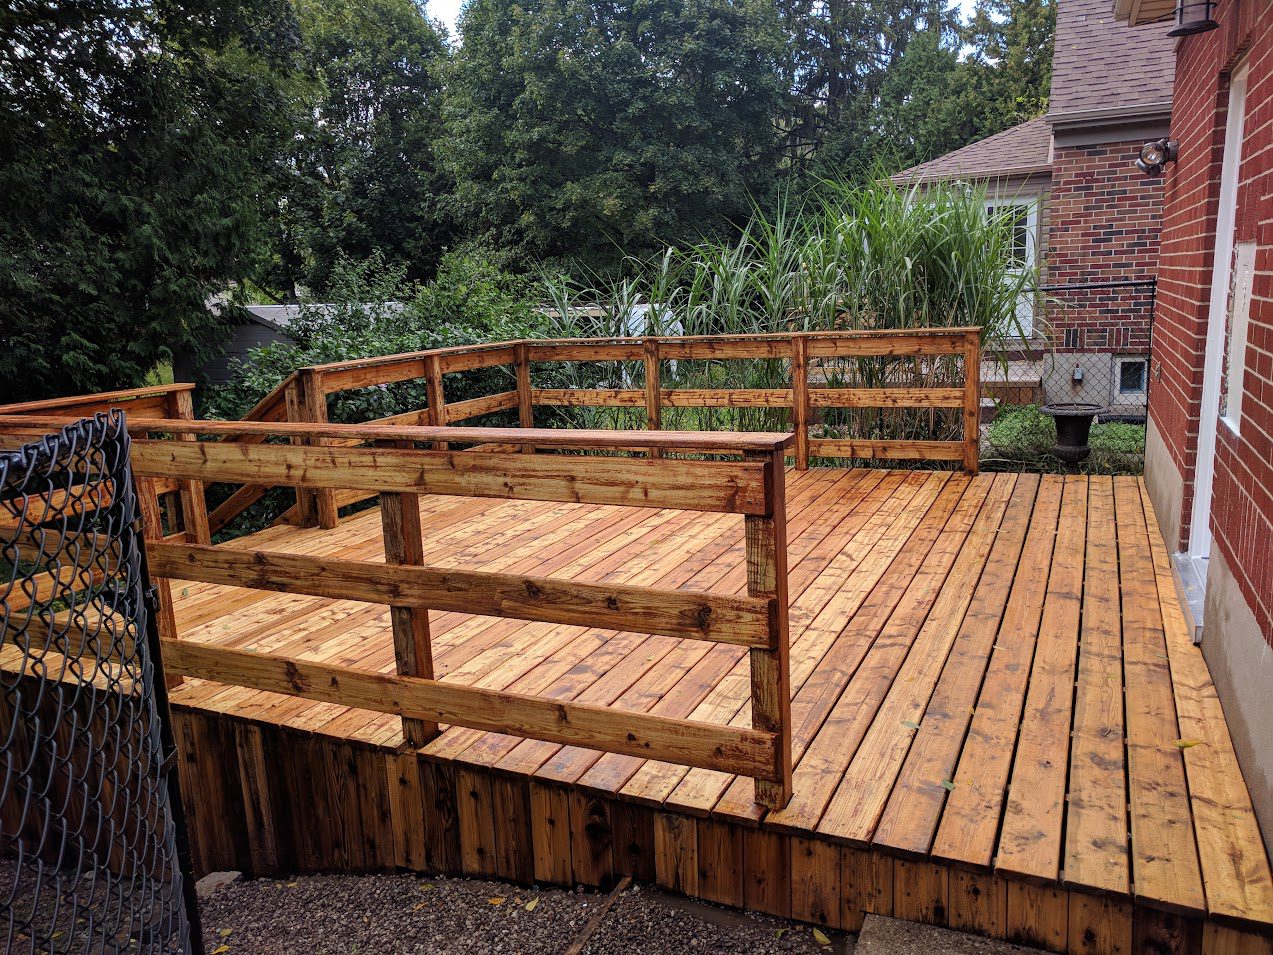 Deck Staining in Hamilton Ontario in an Oil Based Stain